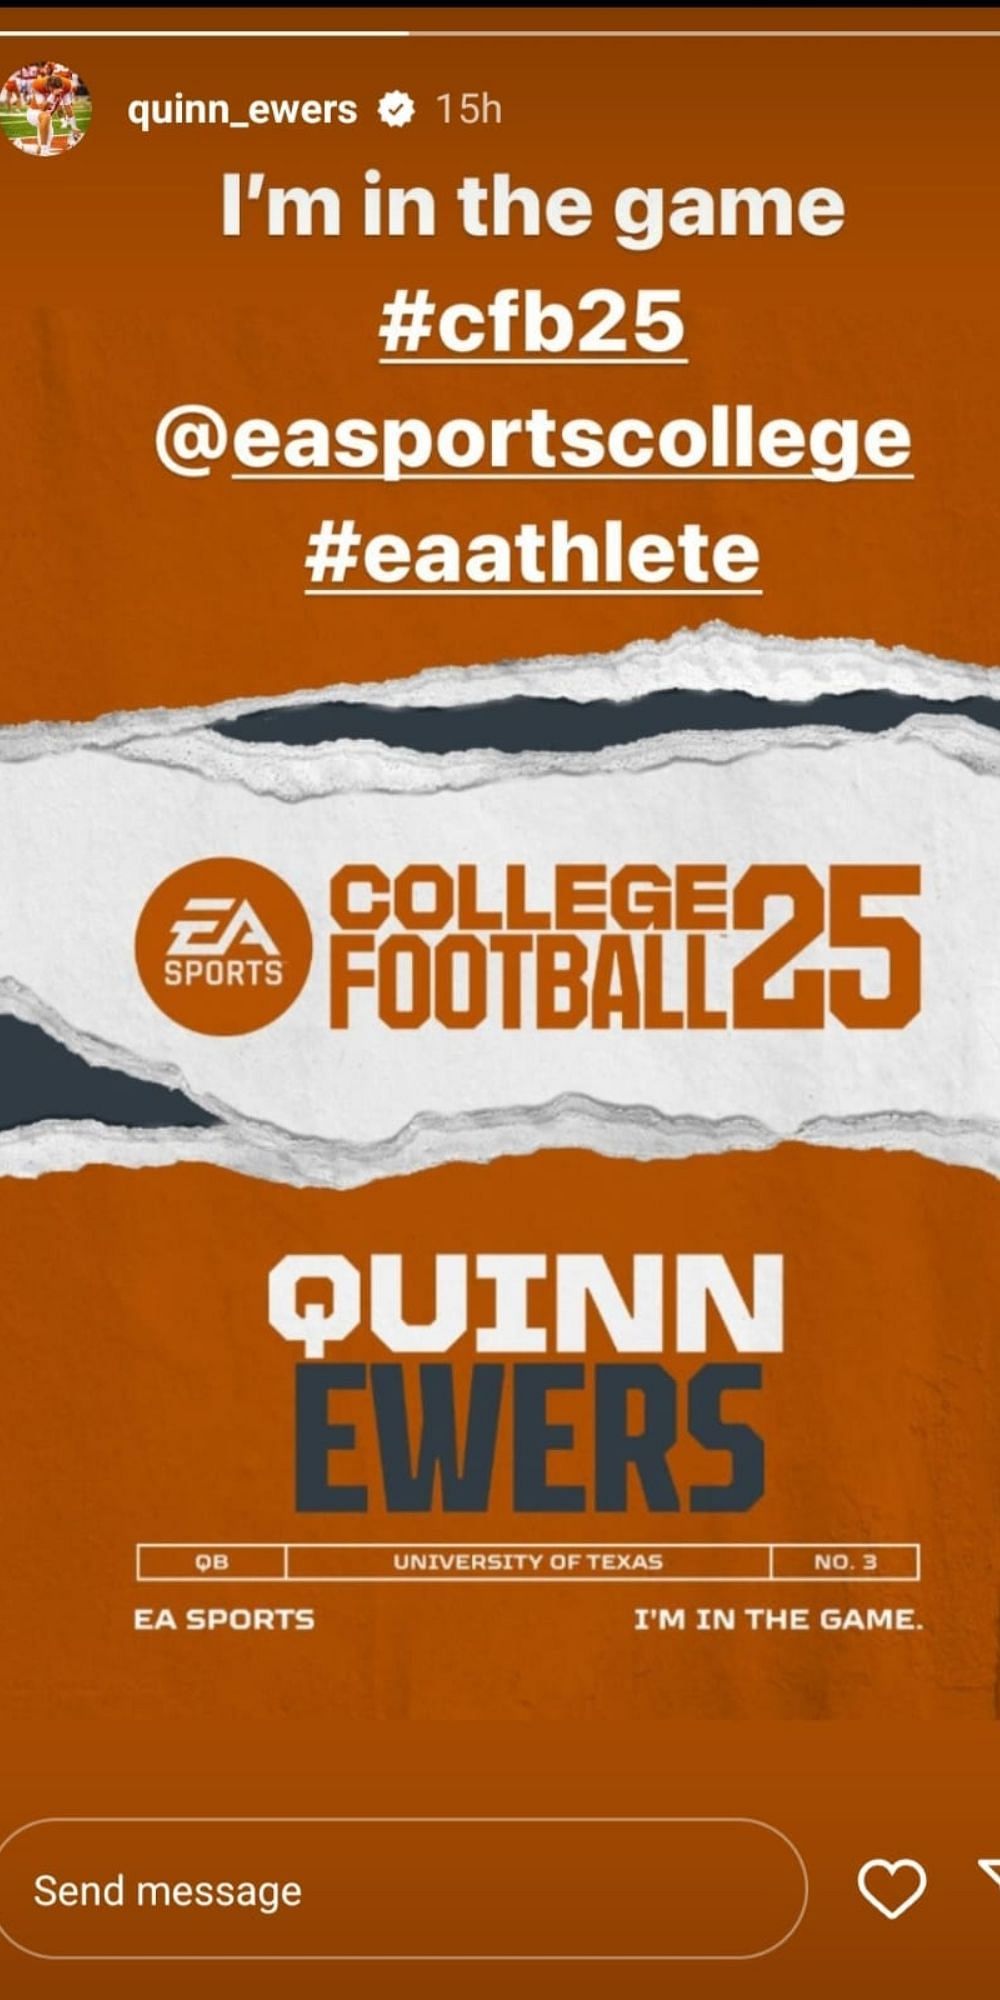 Quinn Ewers&#039; revelation about the EA Sports College Football 25.